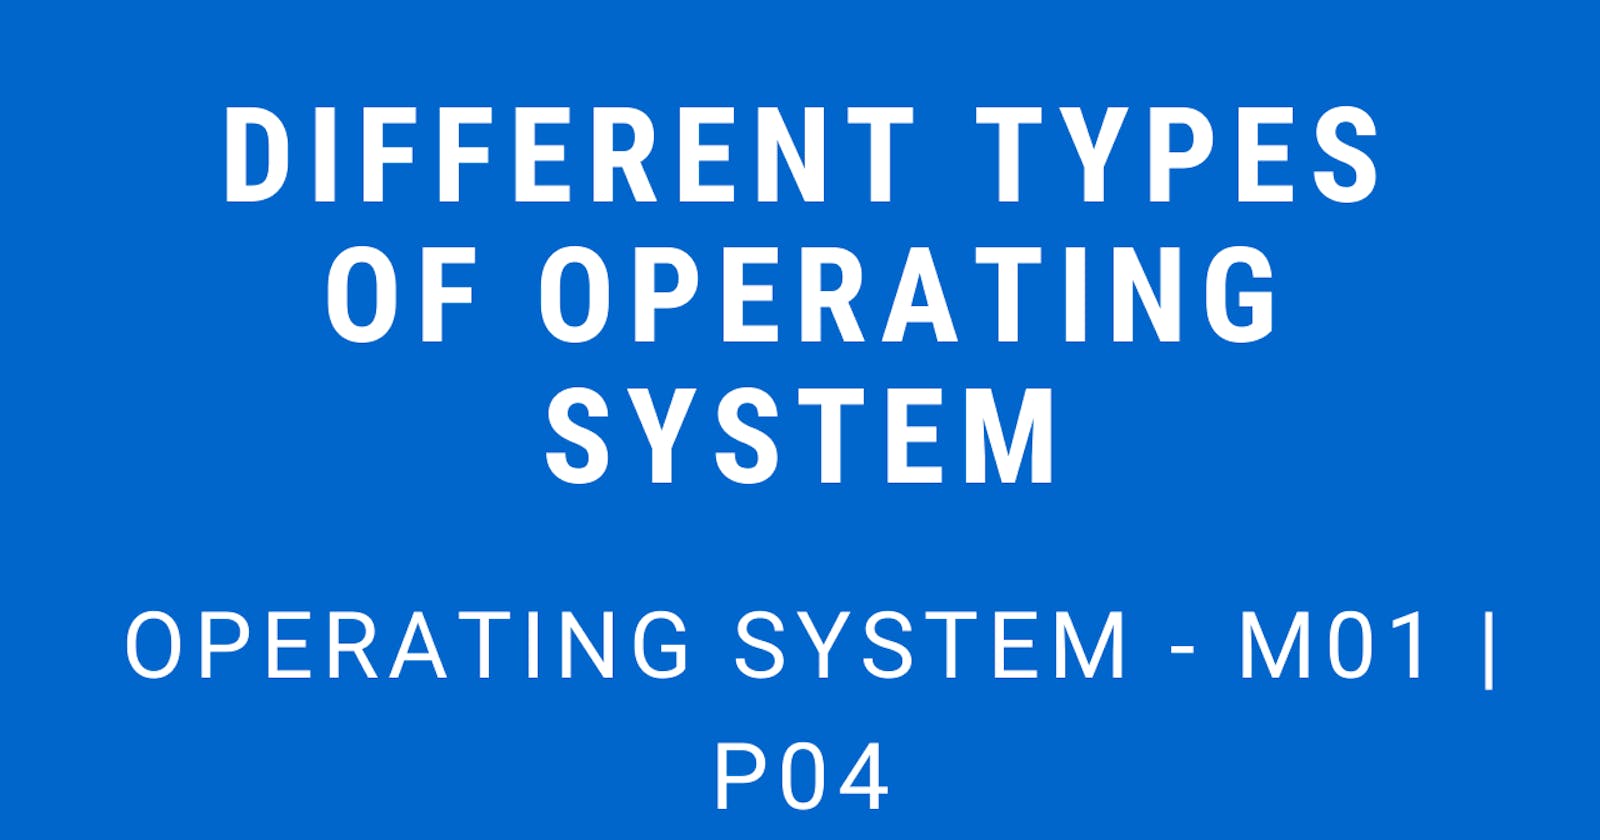 Different Types of Operating System | Operating System - M01 P04